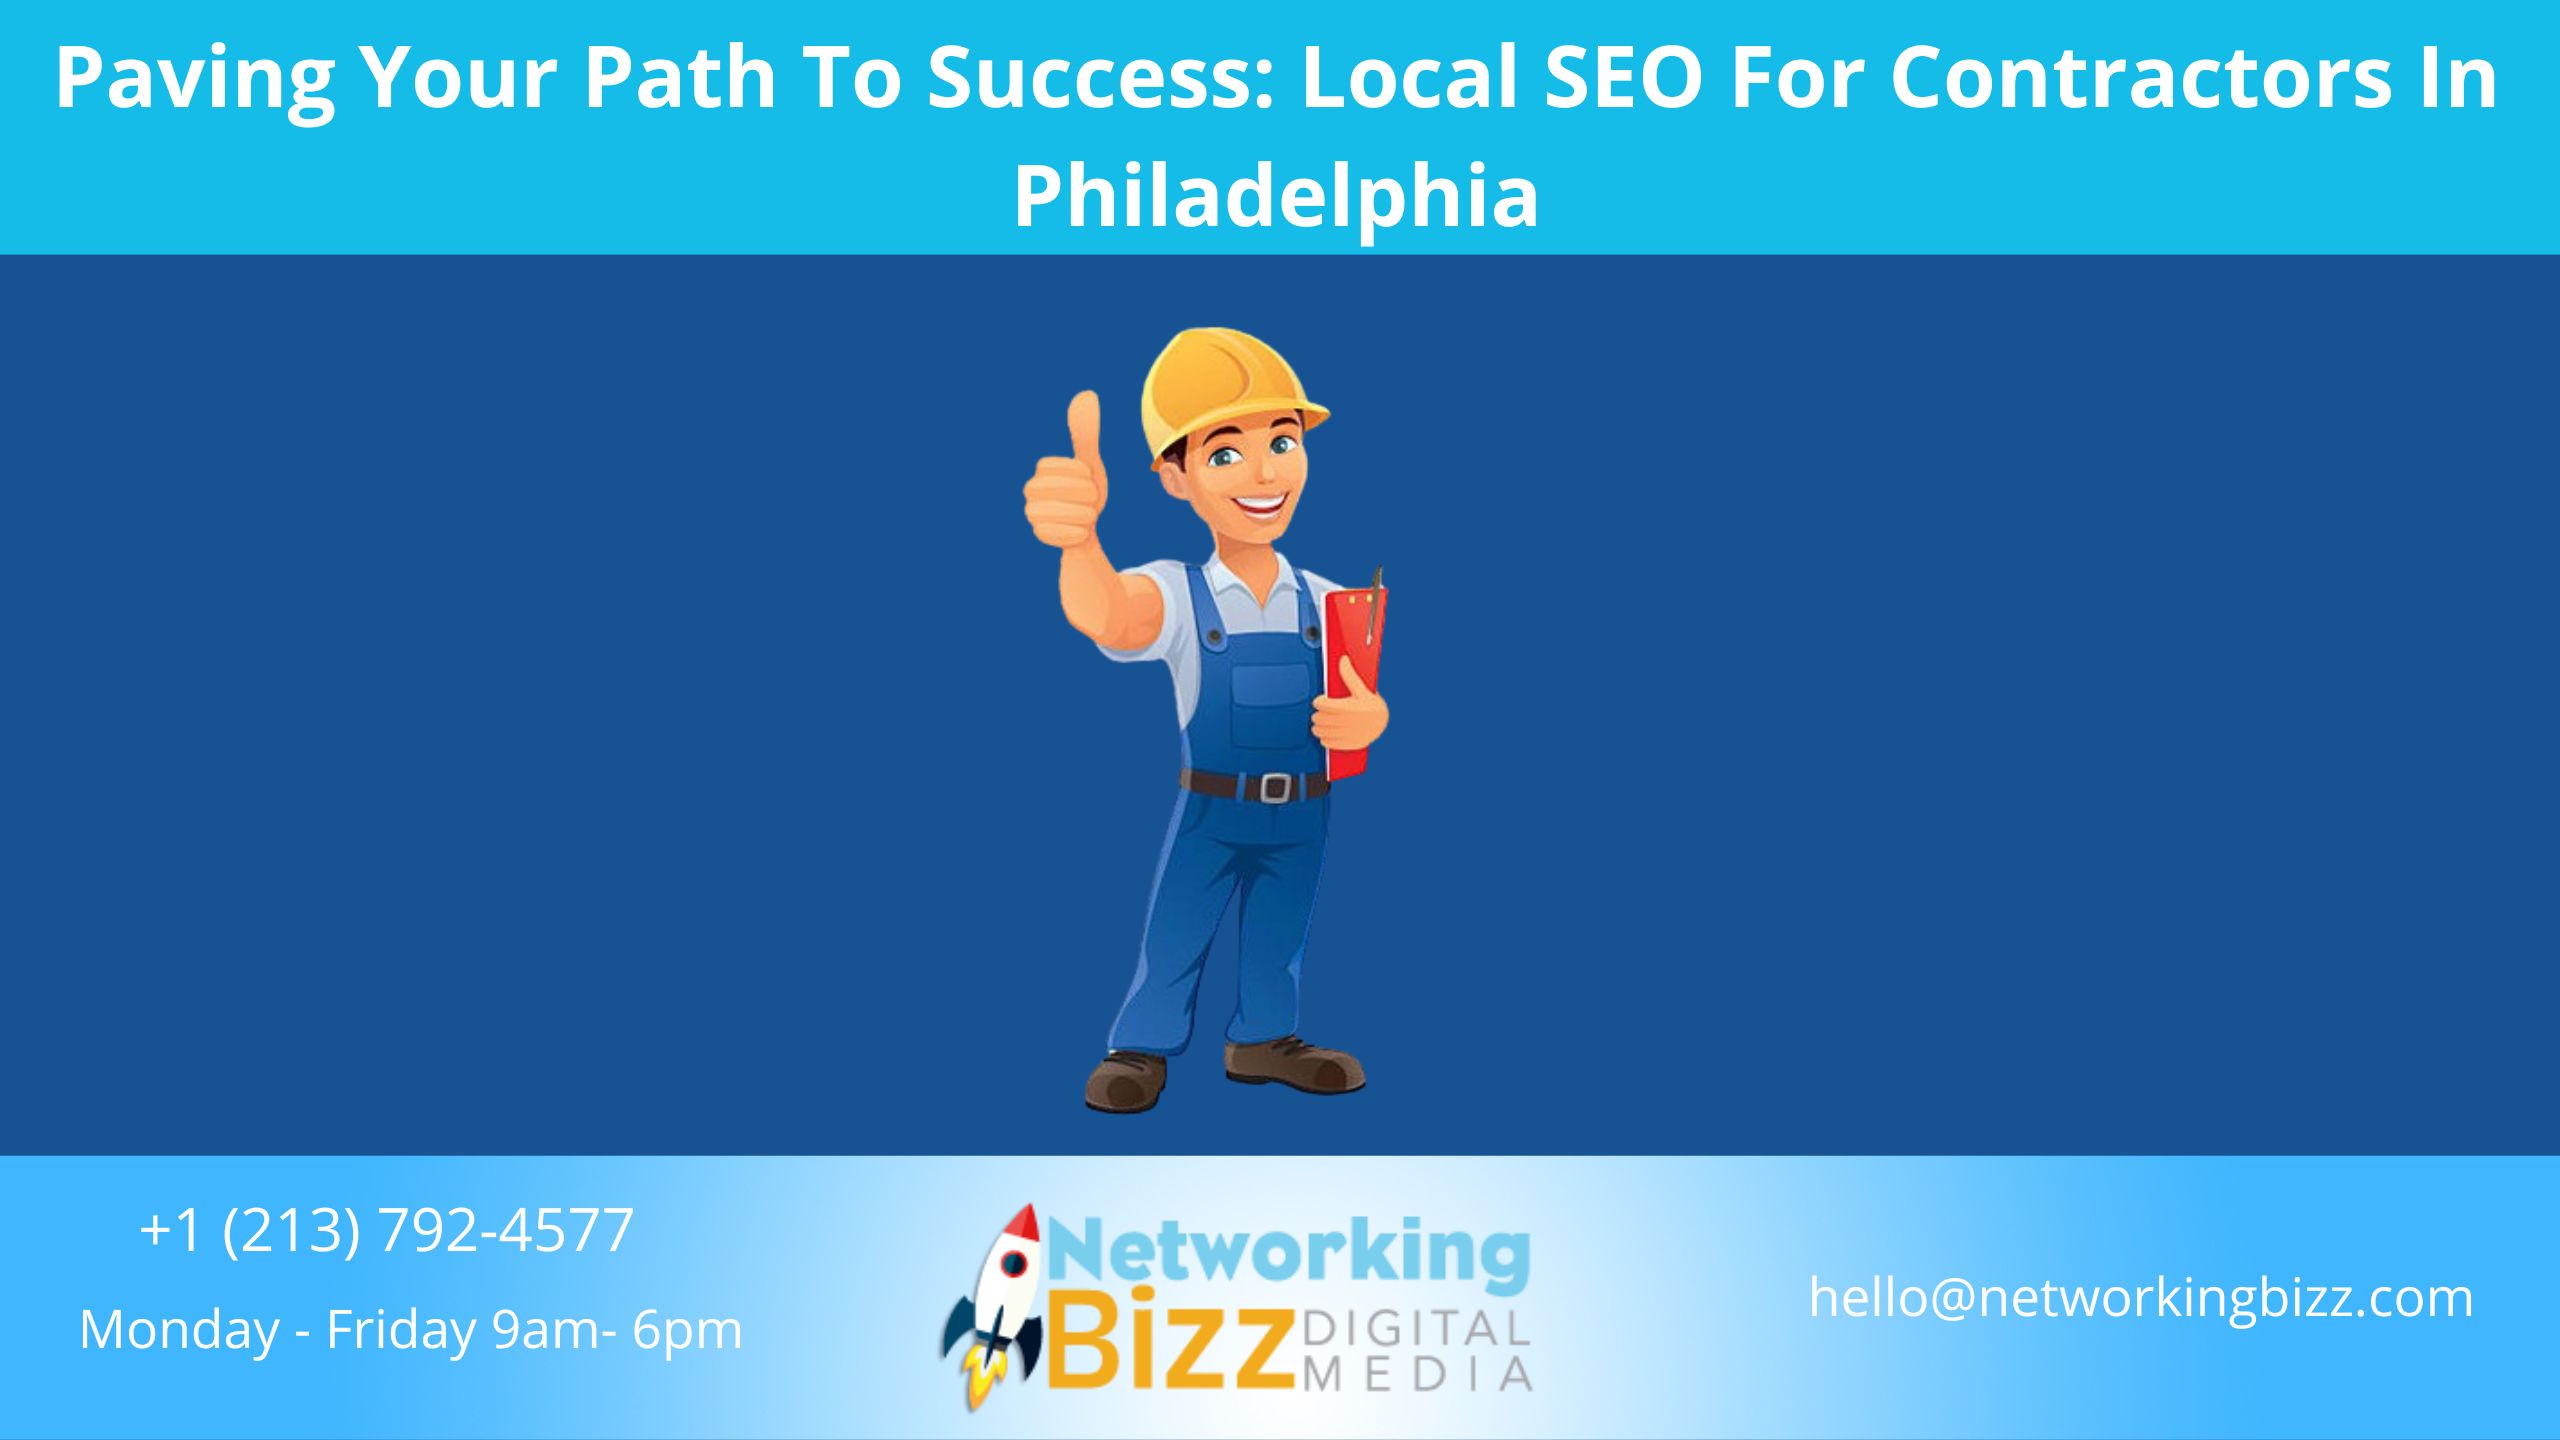 Paving Your Path To Success: Local SEO For Contractors In Philadelphia